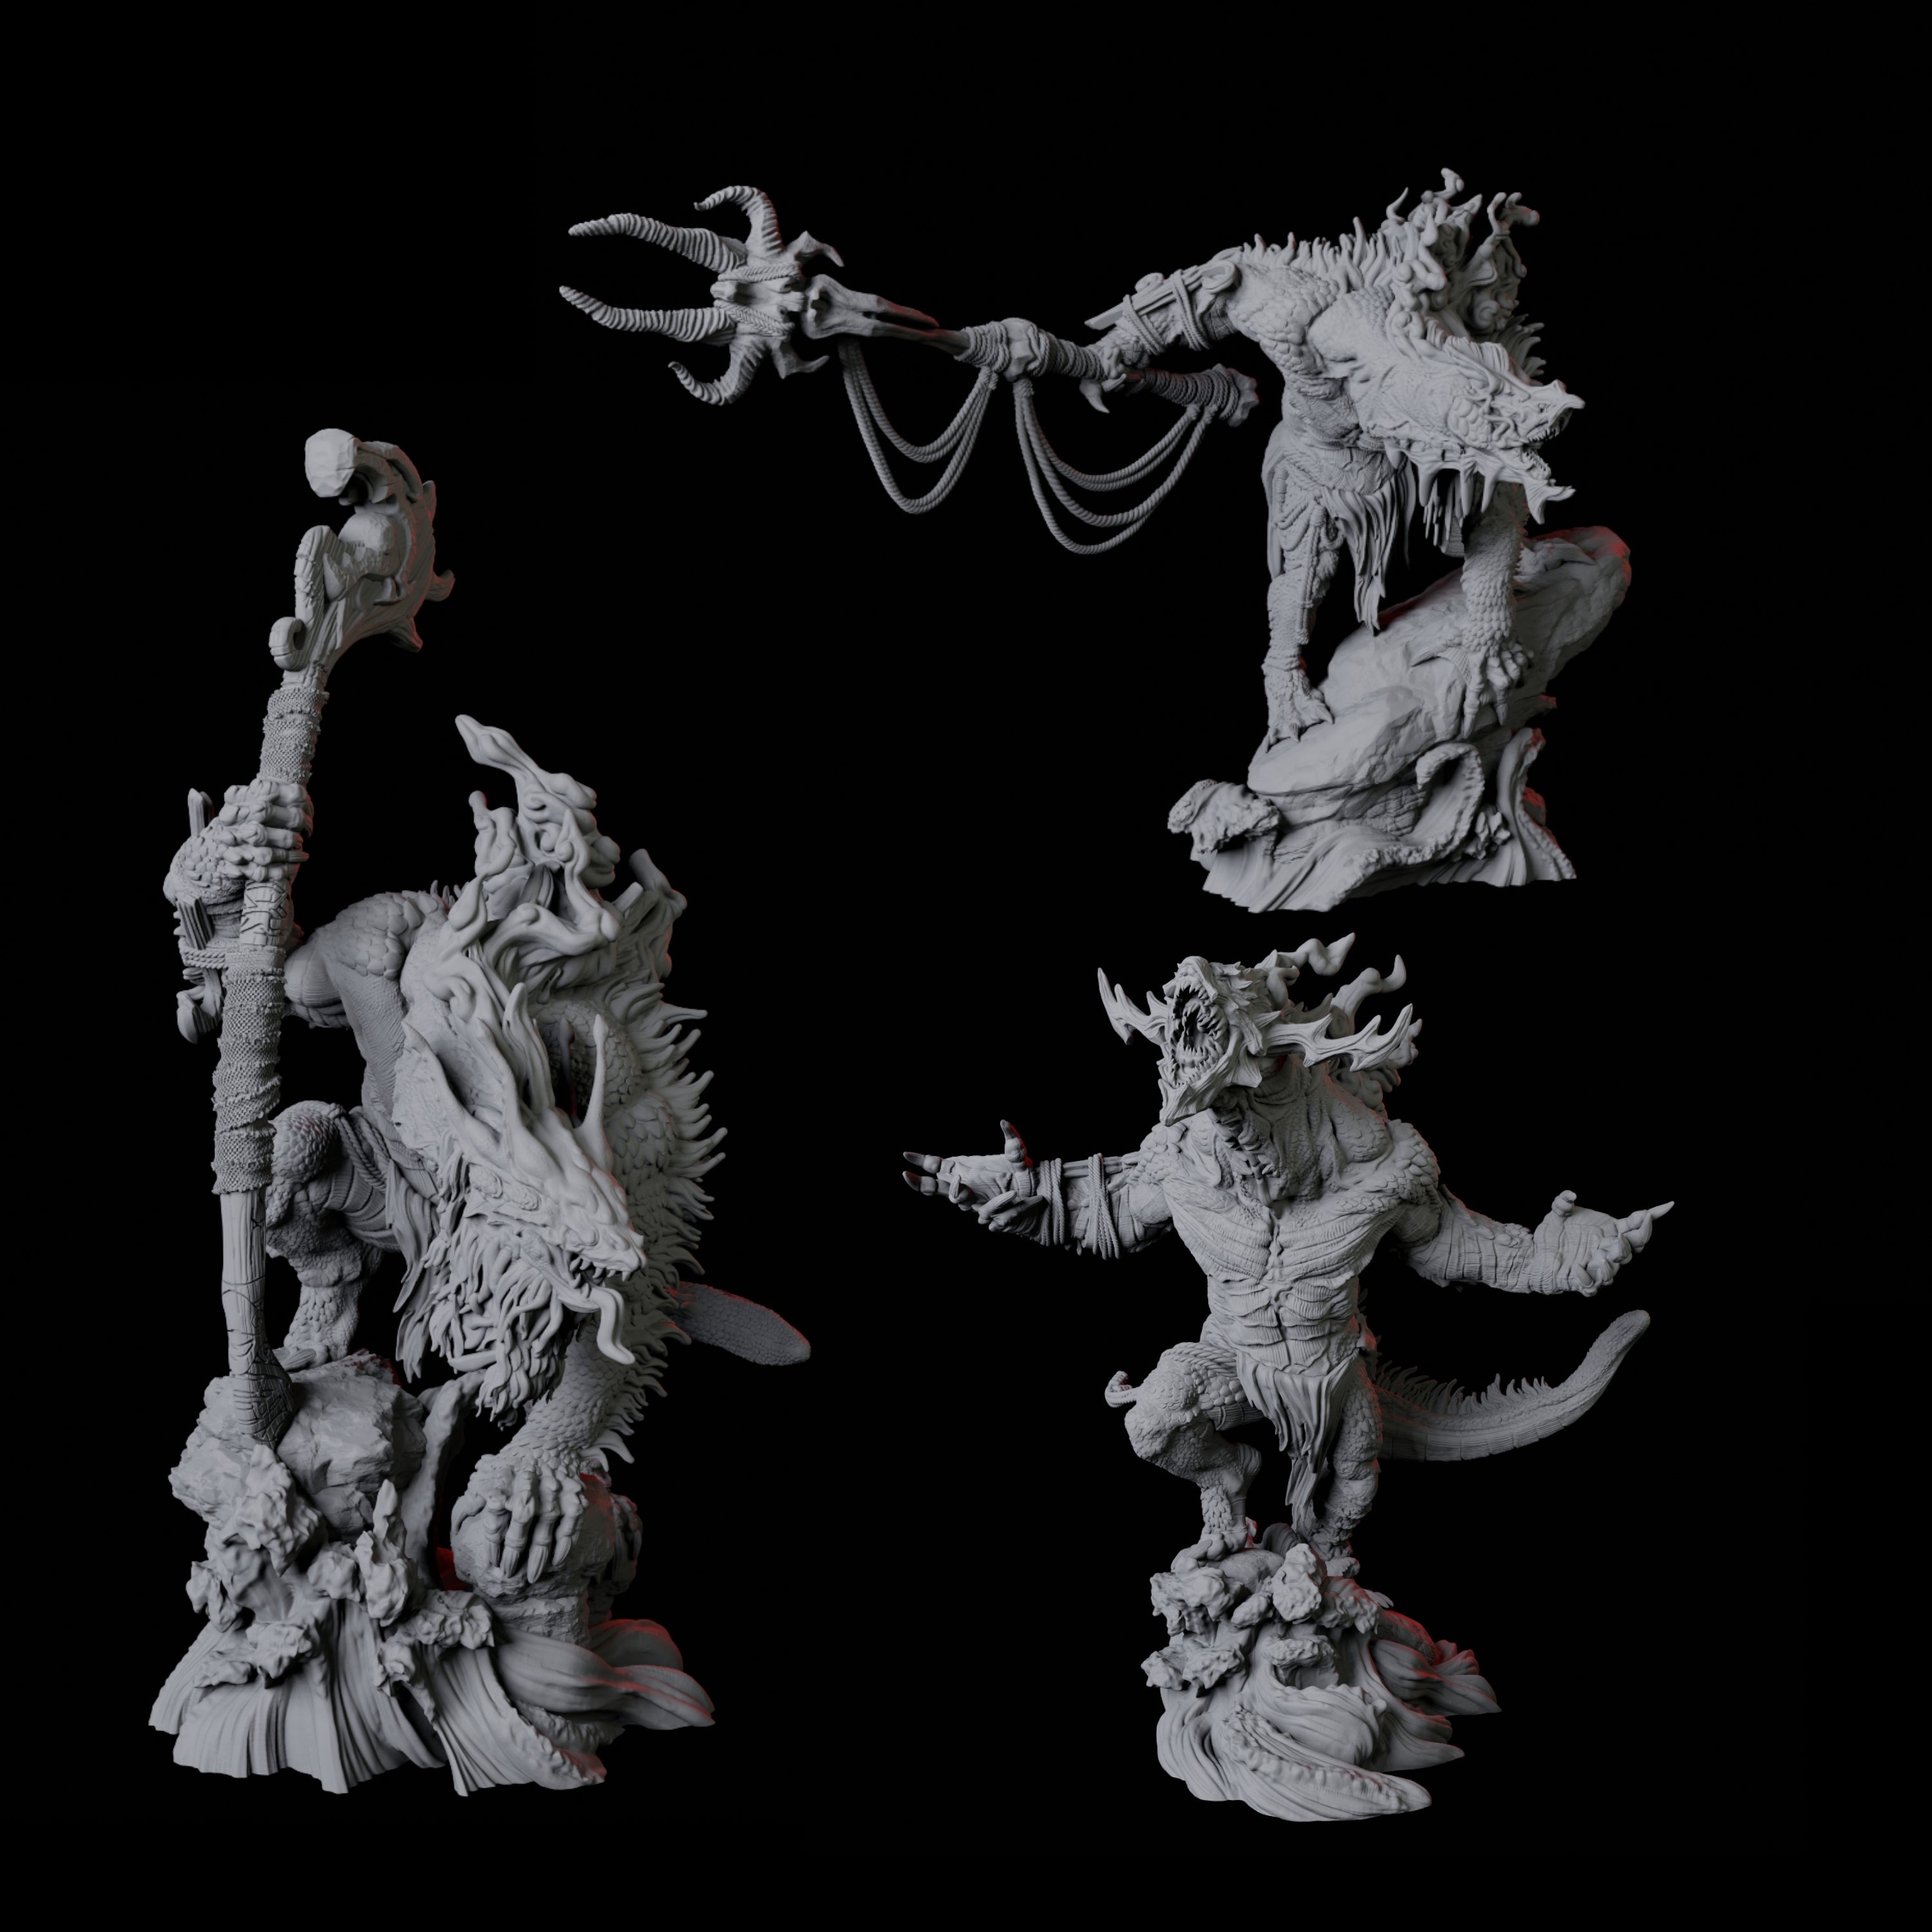 Three Storm Trolls Miniature for Dungeons and Dragons, Pathfinder or other TTRPGs